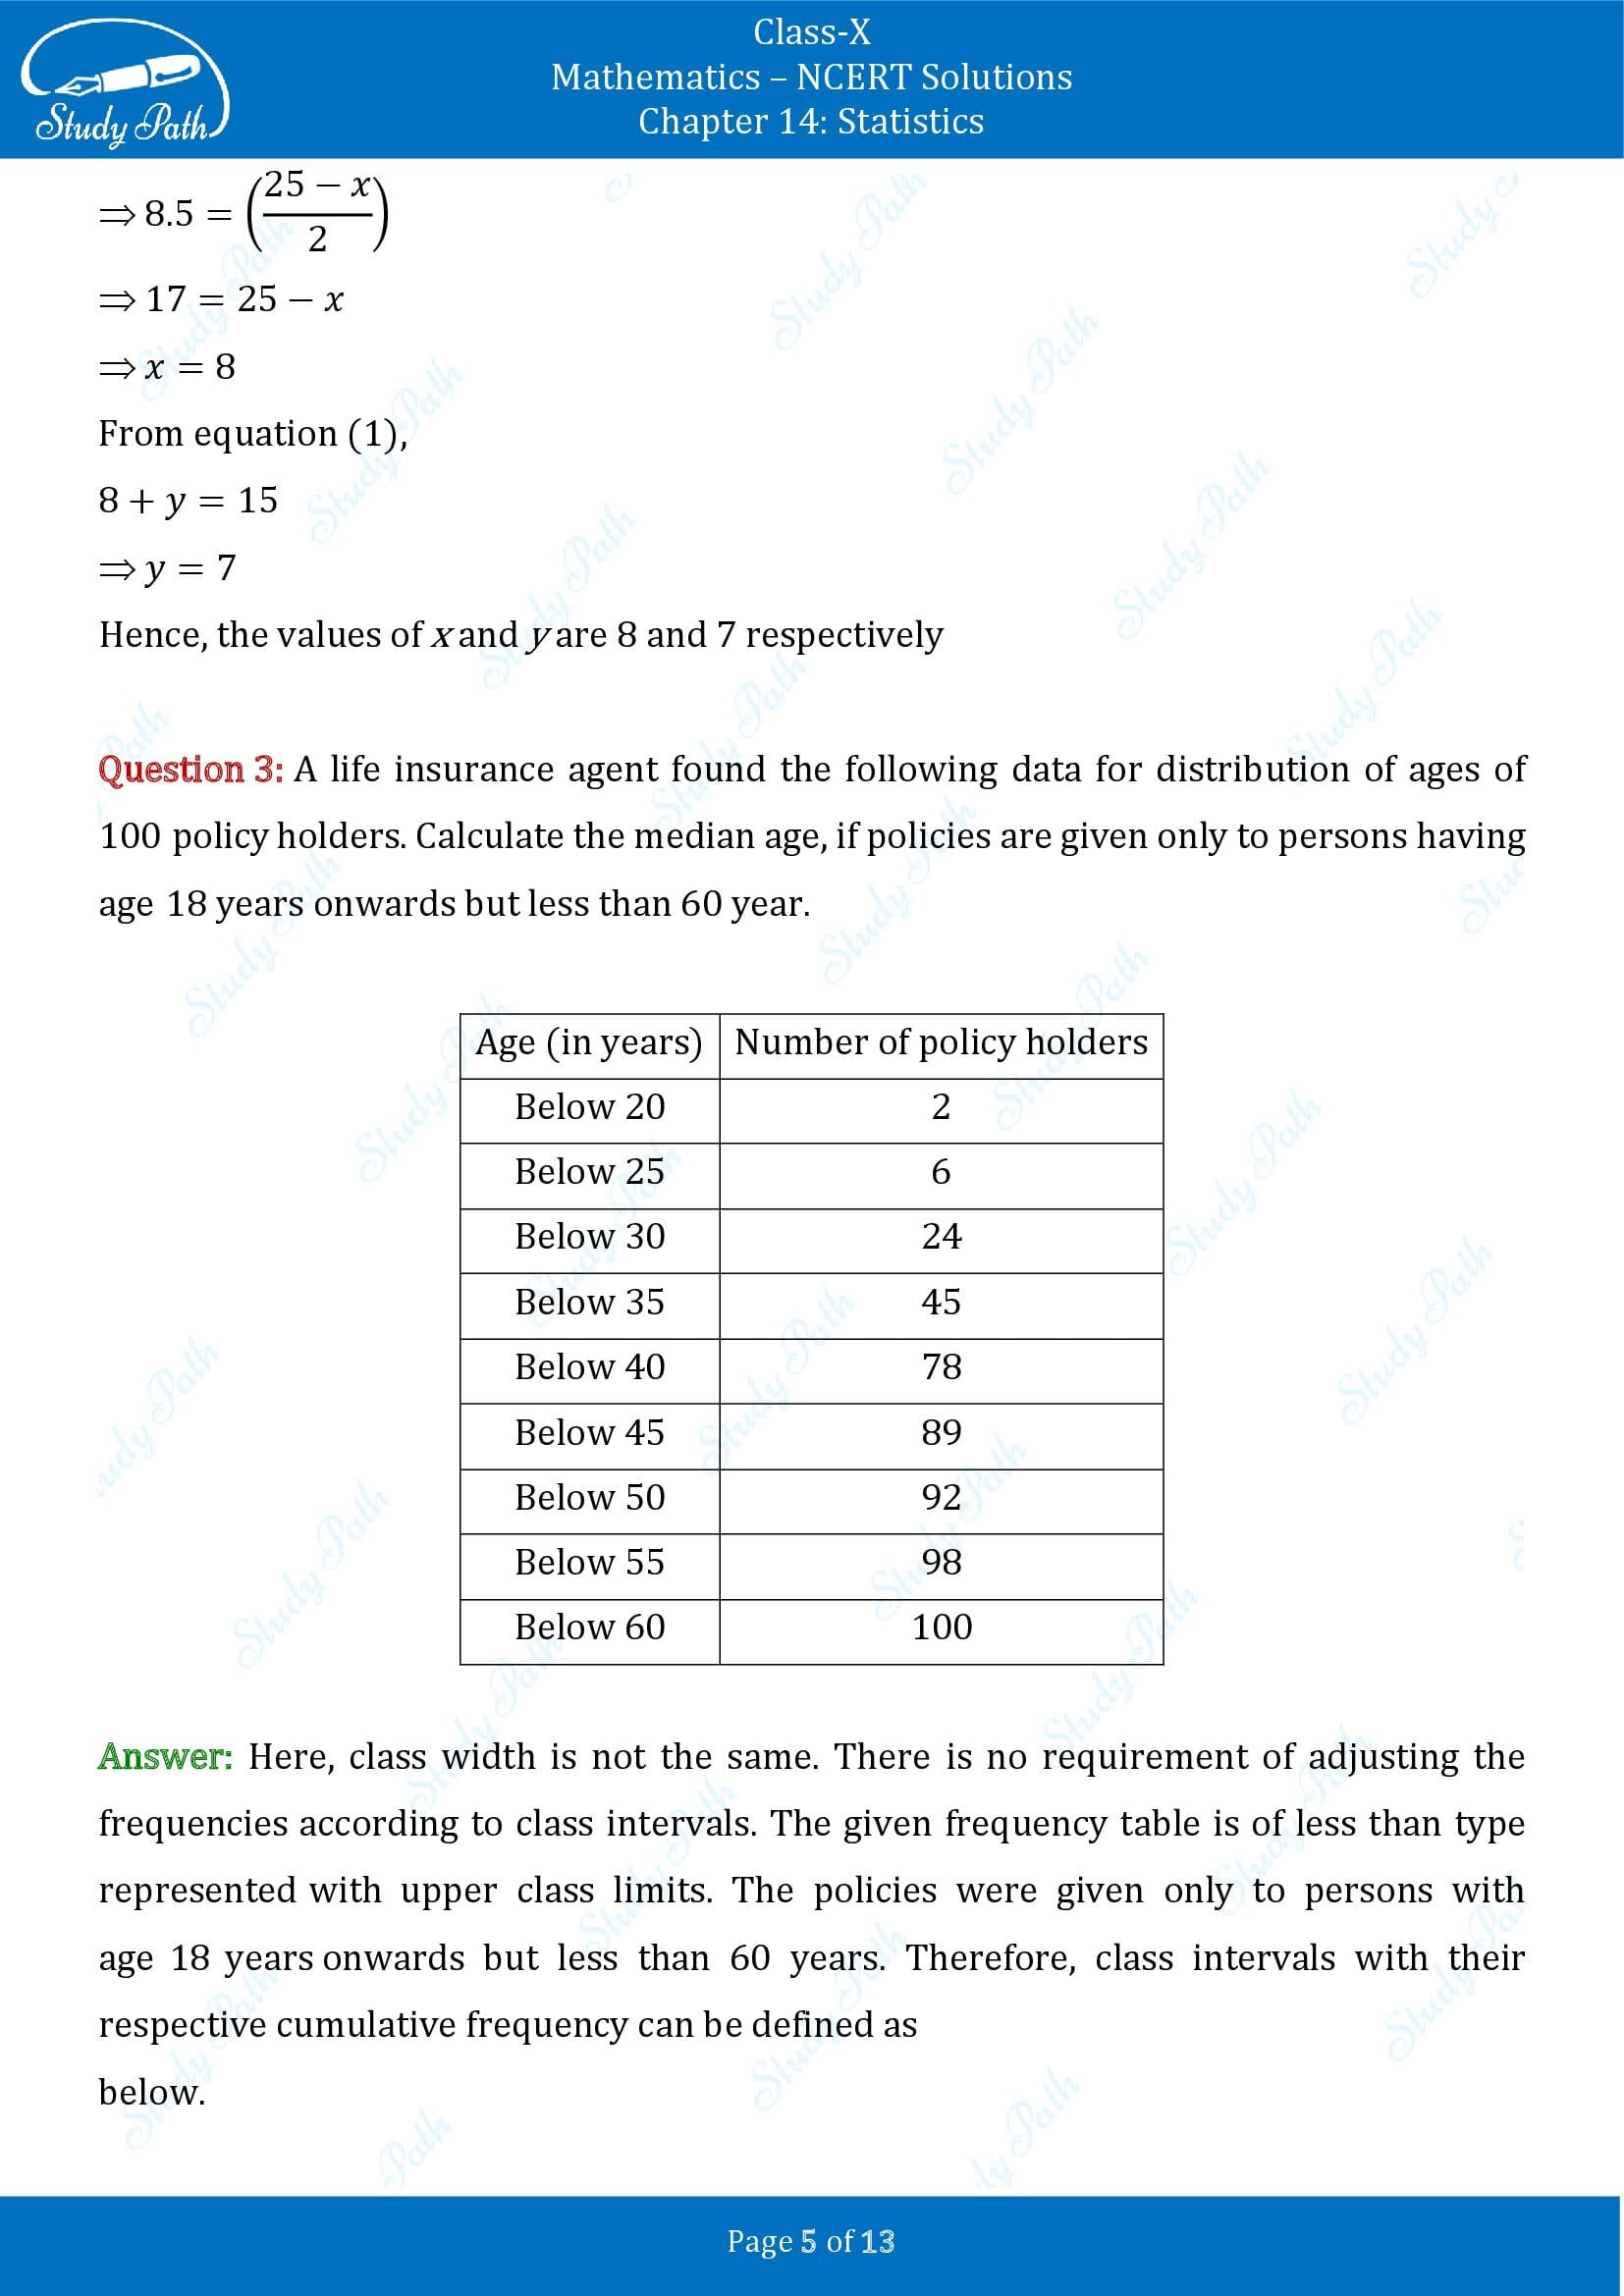 NCERT Solutions for Class 10 Maths Chapter 14 Statistics Exercise 14.3 00005